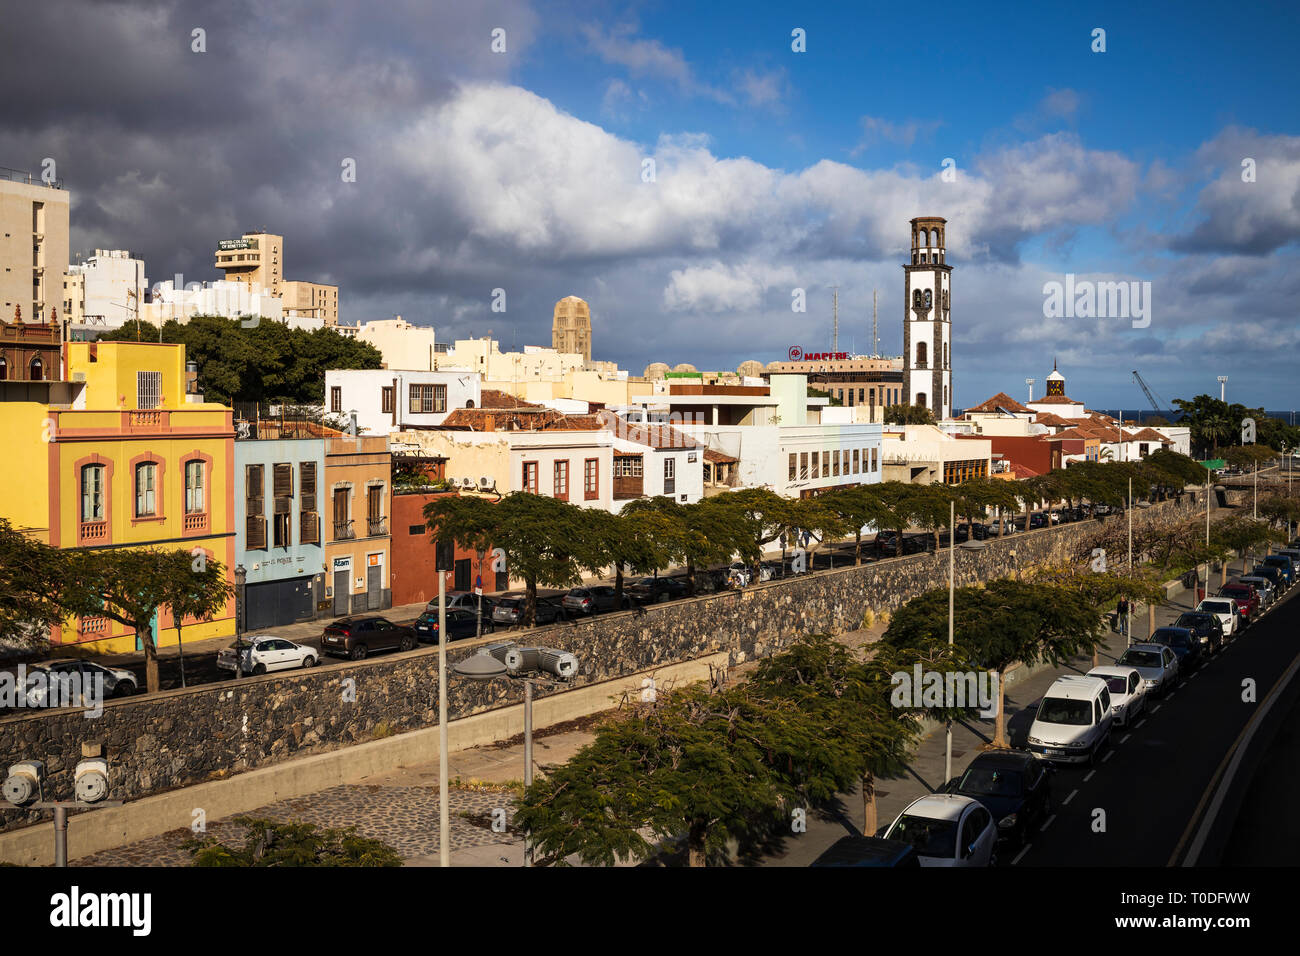 Skyline view over the Barranco de Los santos to the Noria district and the bell tower of the Church of the Immaculate Conception in Santa Cruz de Tene Stock Photo